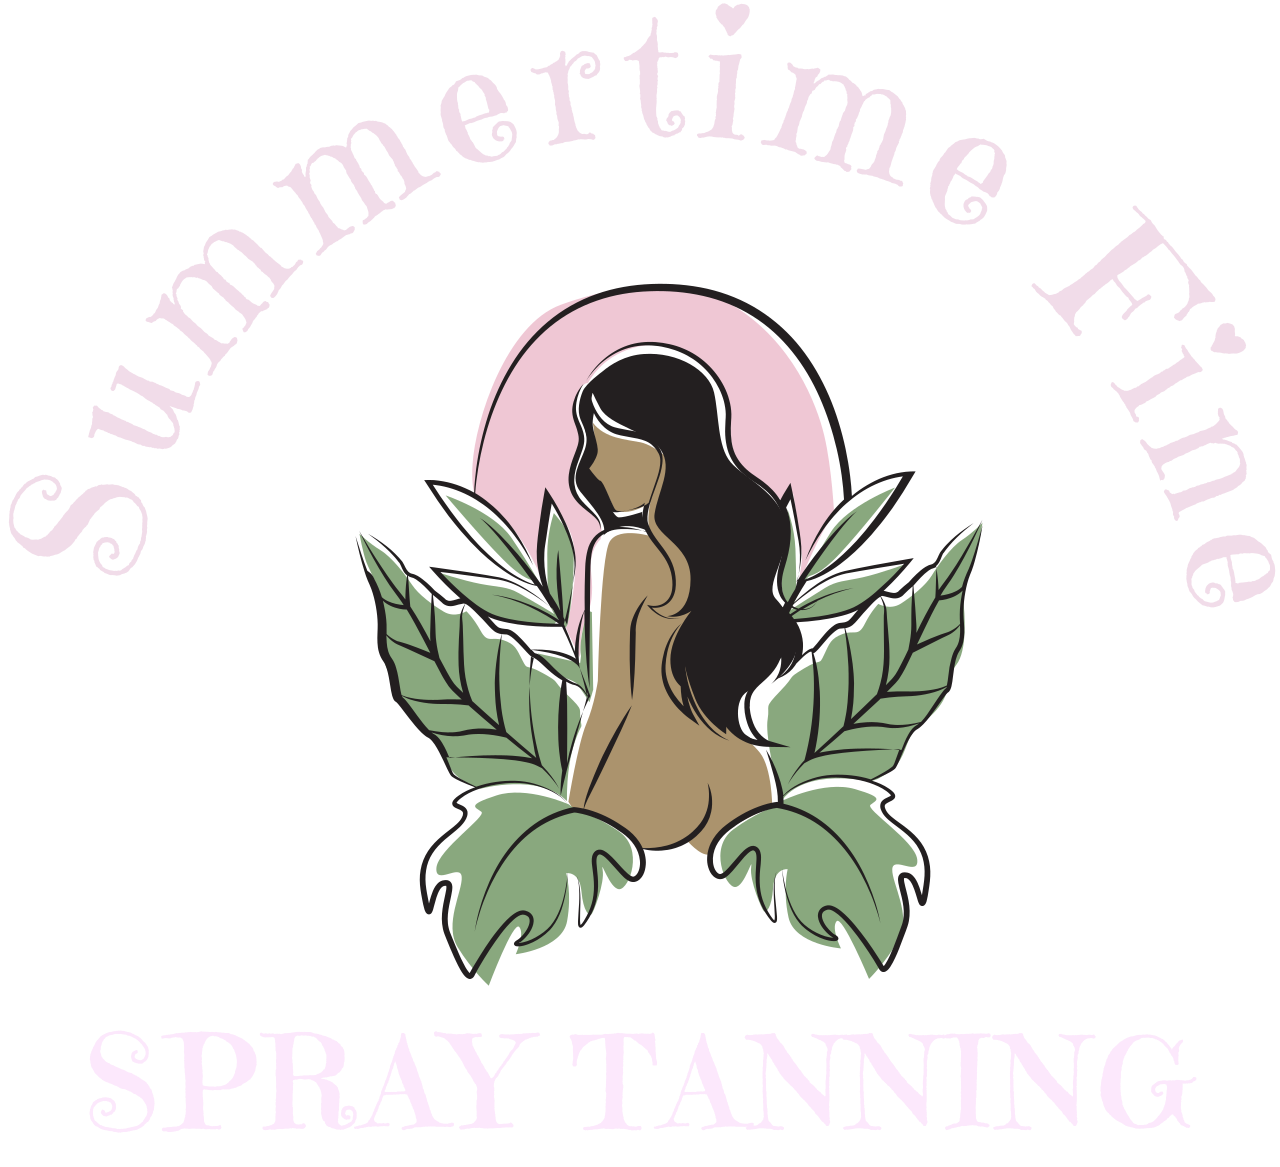 Summertime Fine 's web page